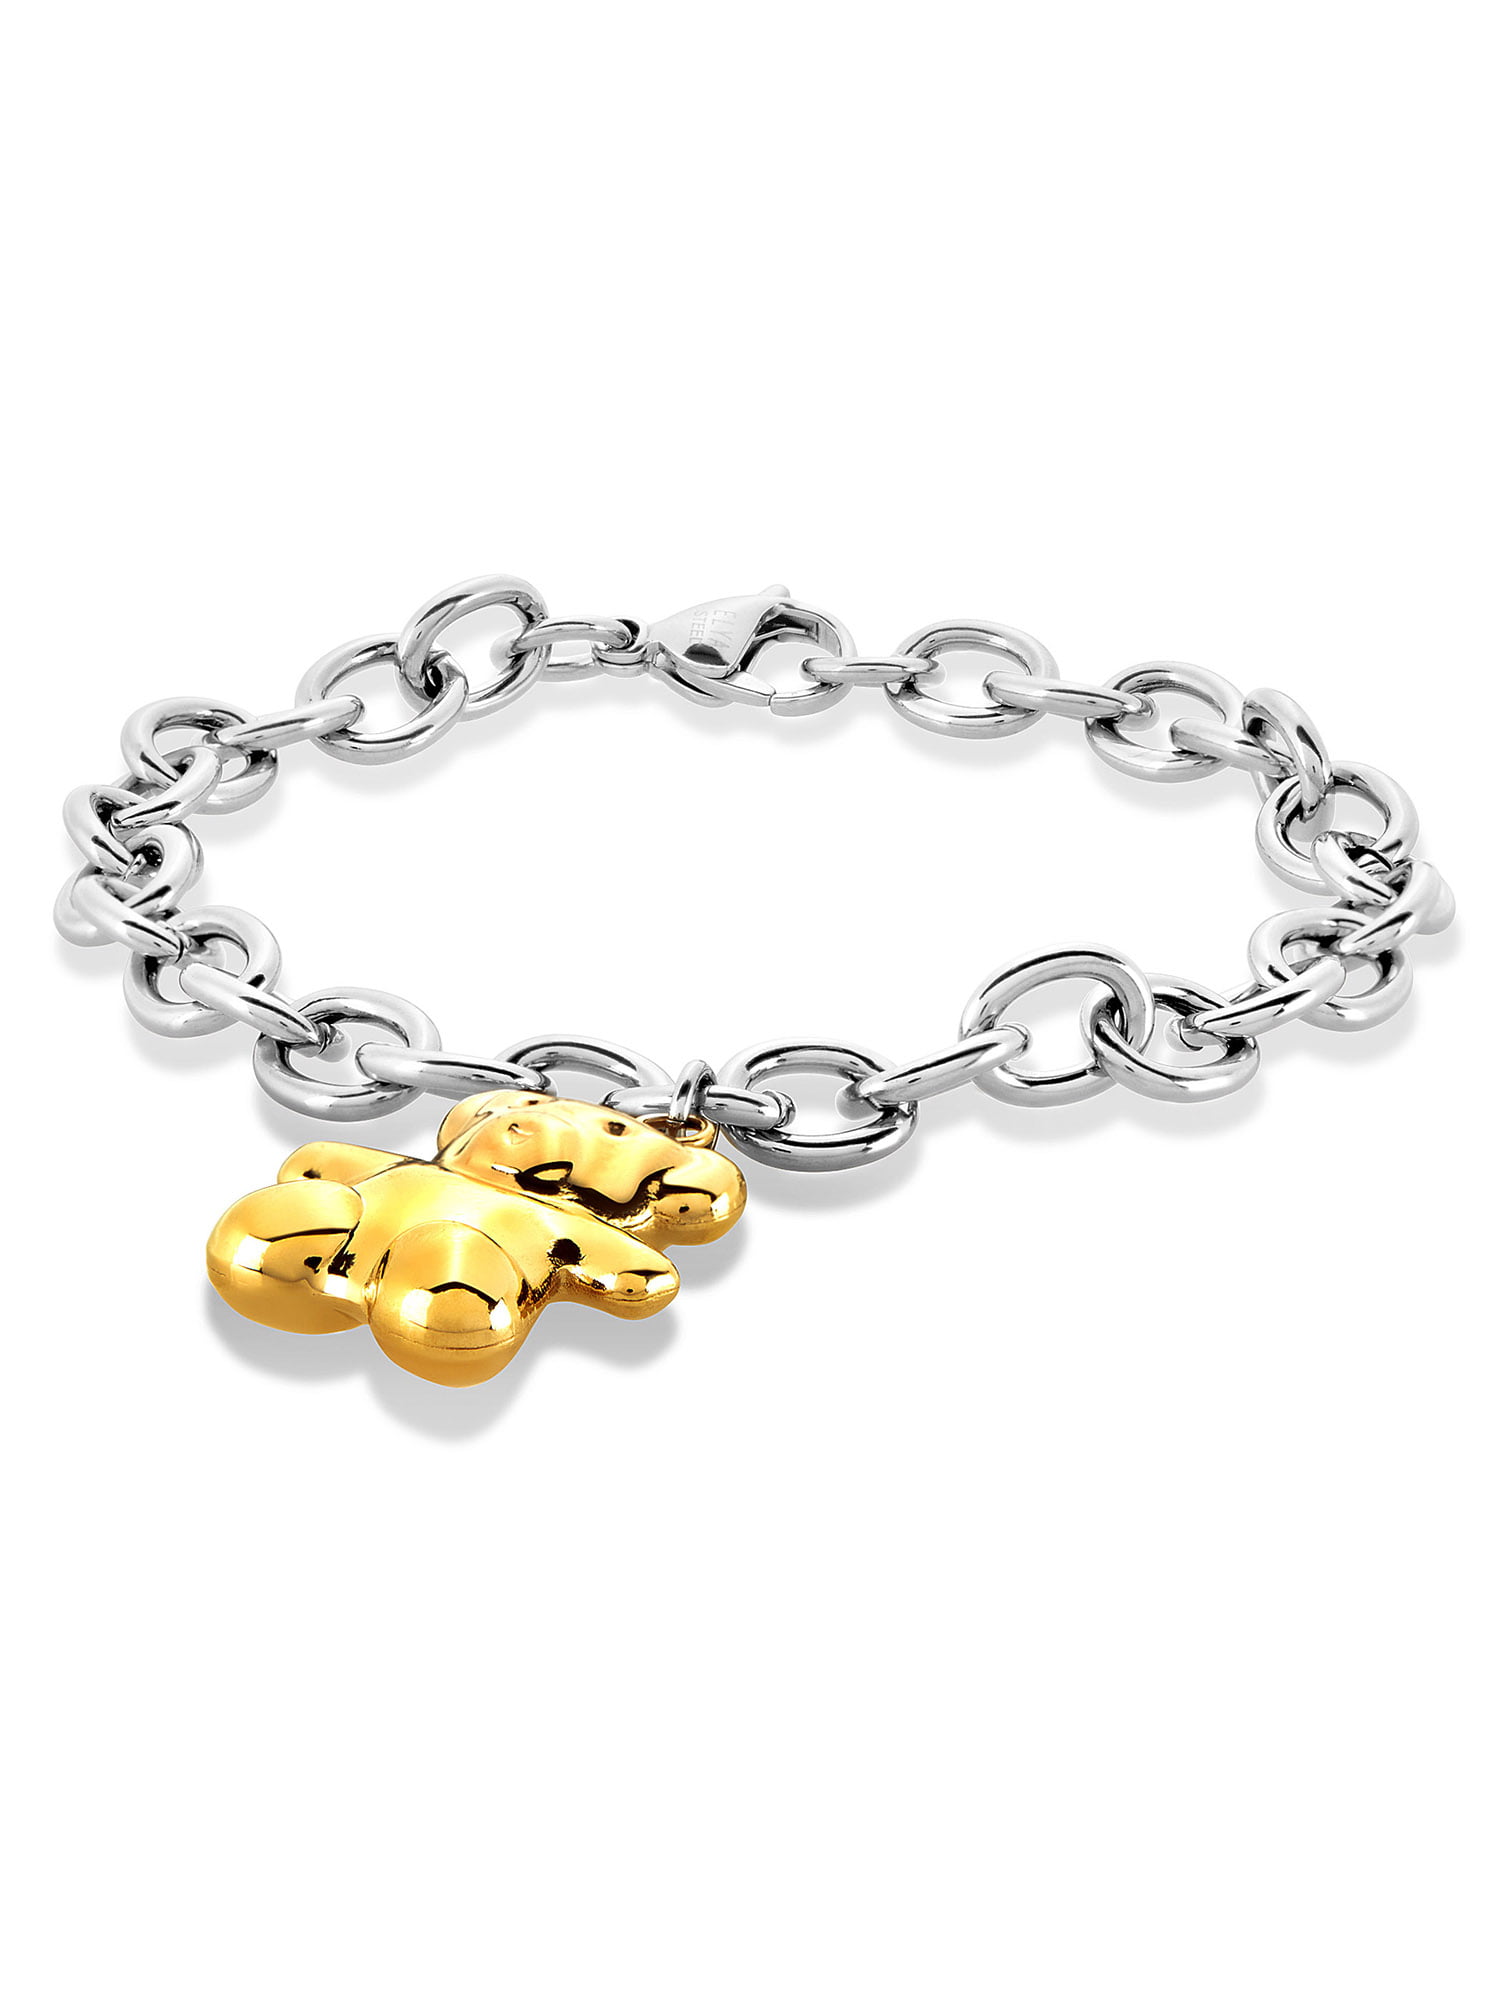 Gold Plated Bear Charm Stainless Steel Cable Chain Bracelet - 8